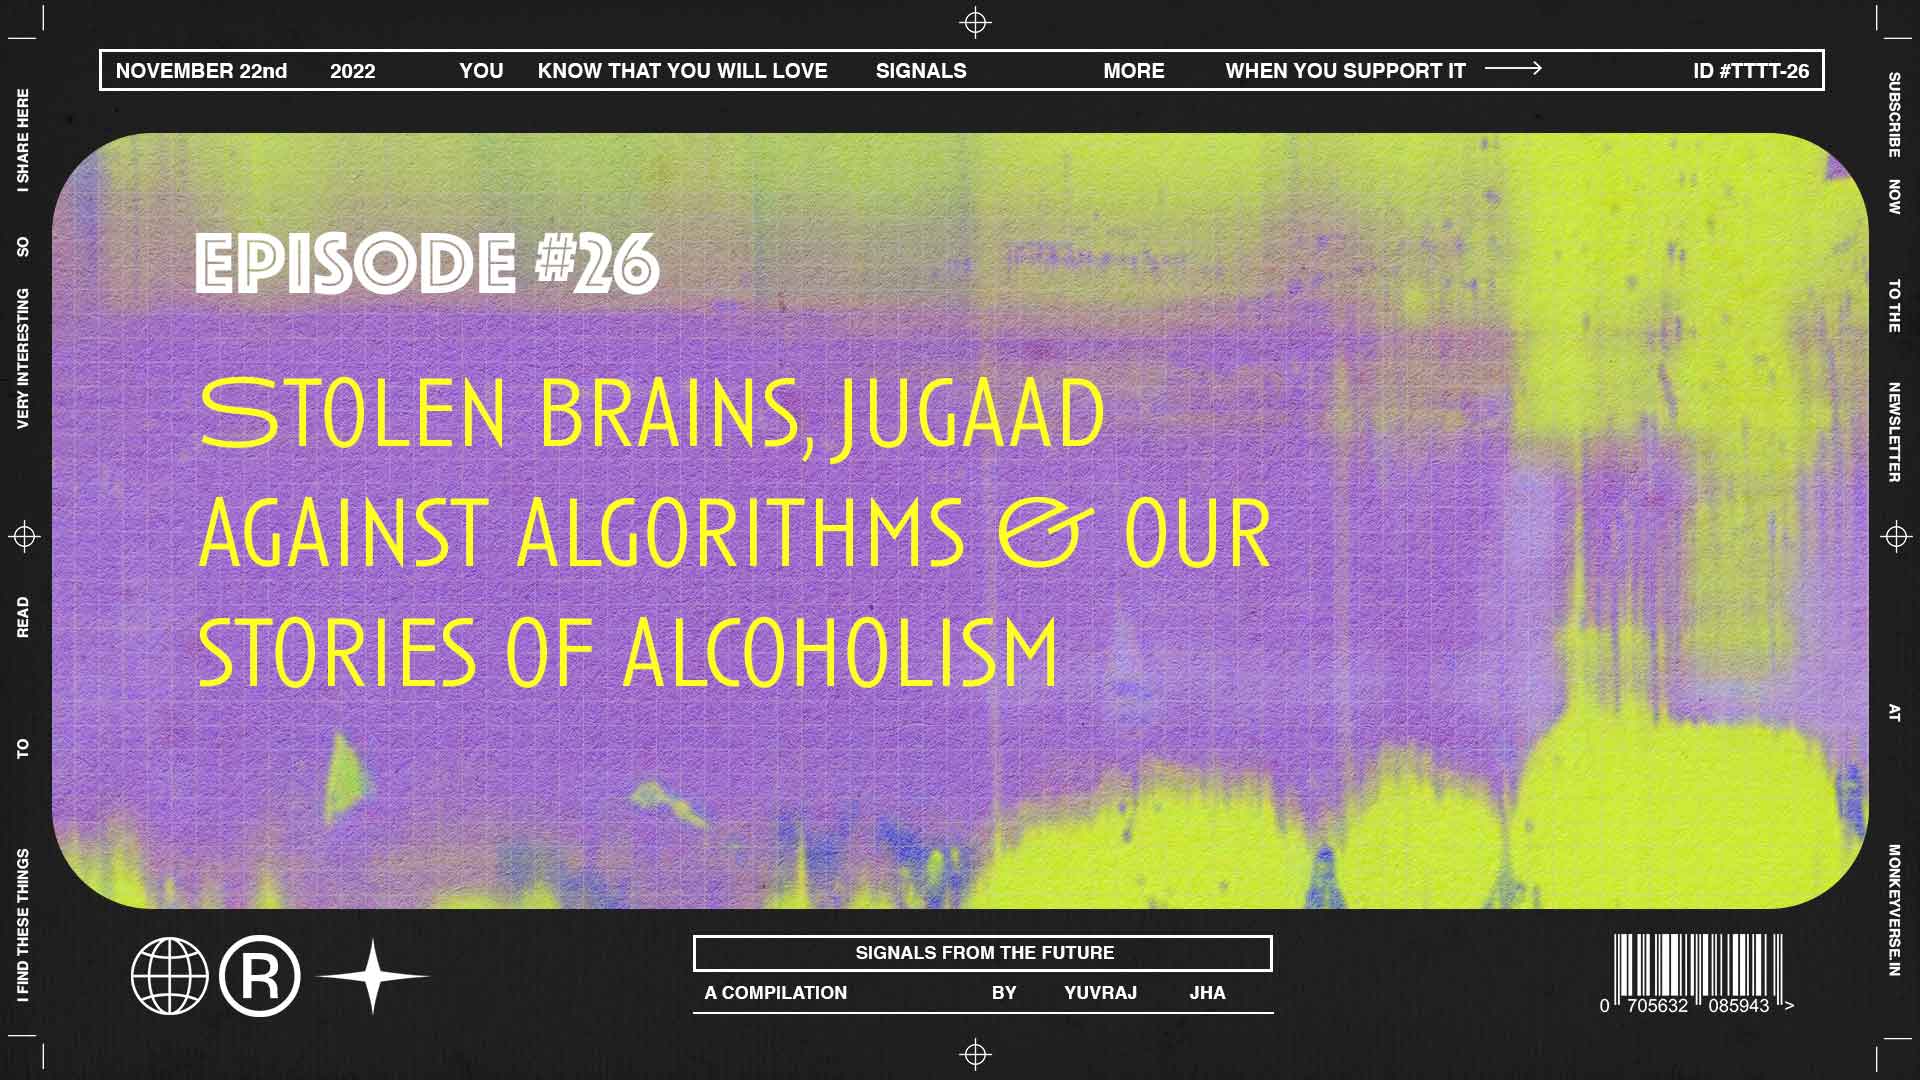 Stories of stealing genius brains, fighting against algorithms, and alcoholism